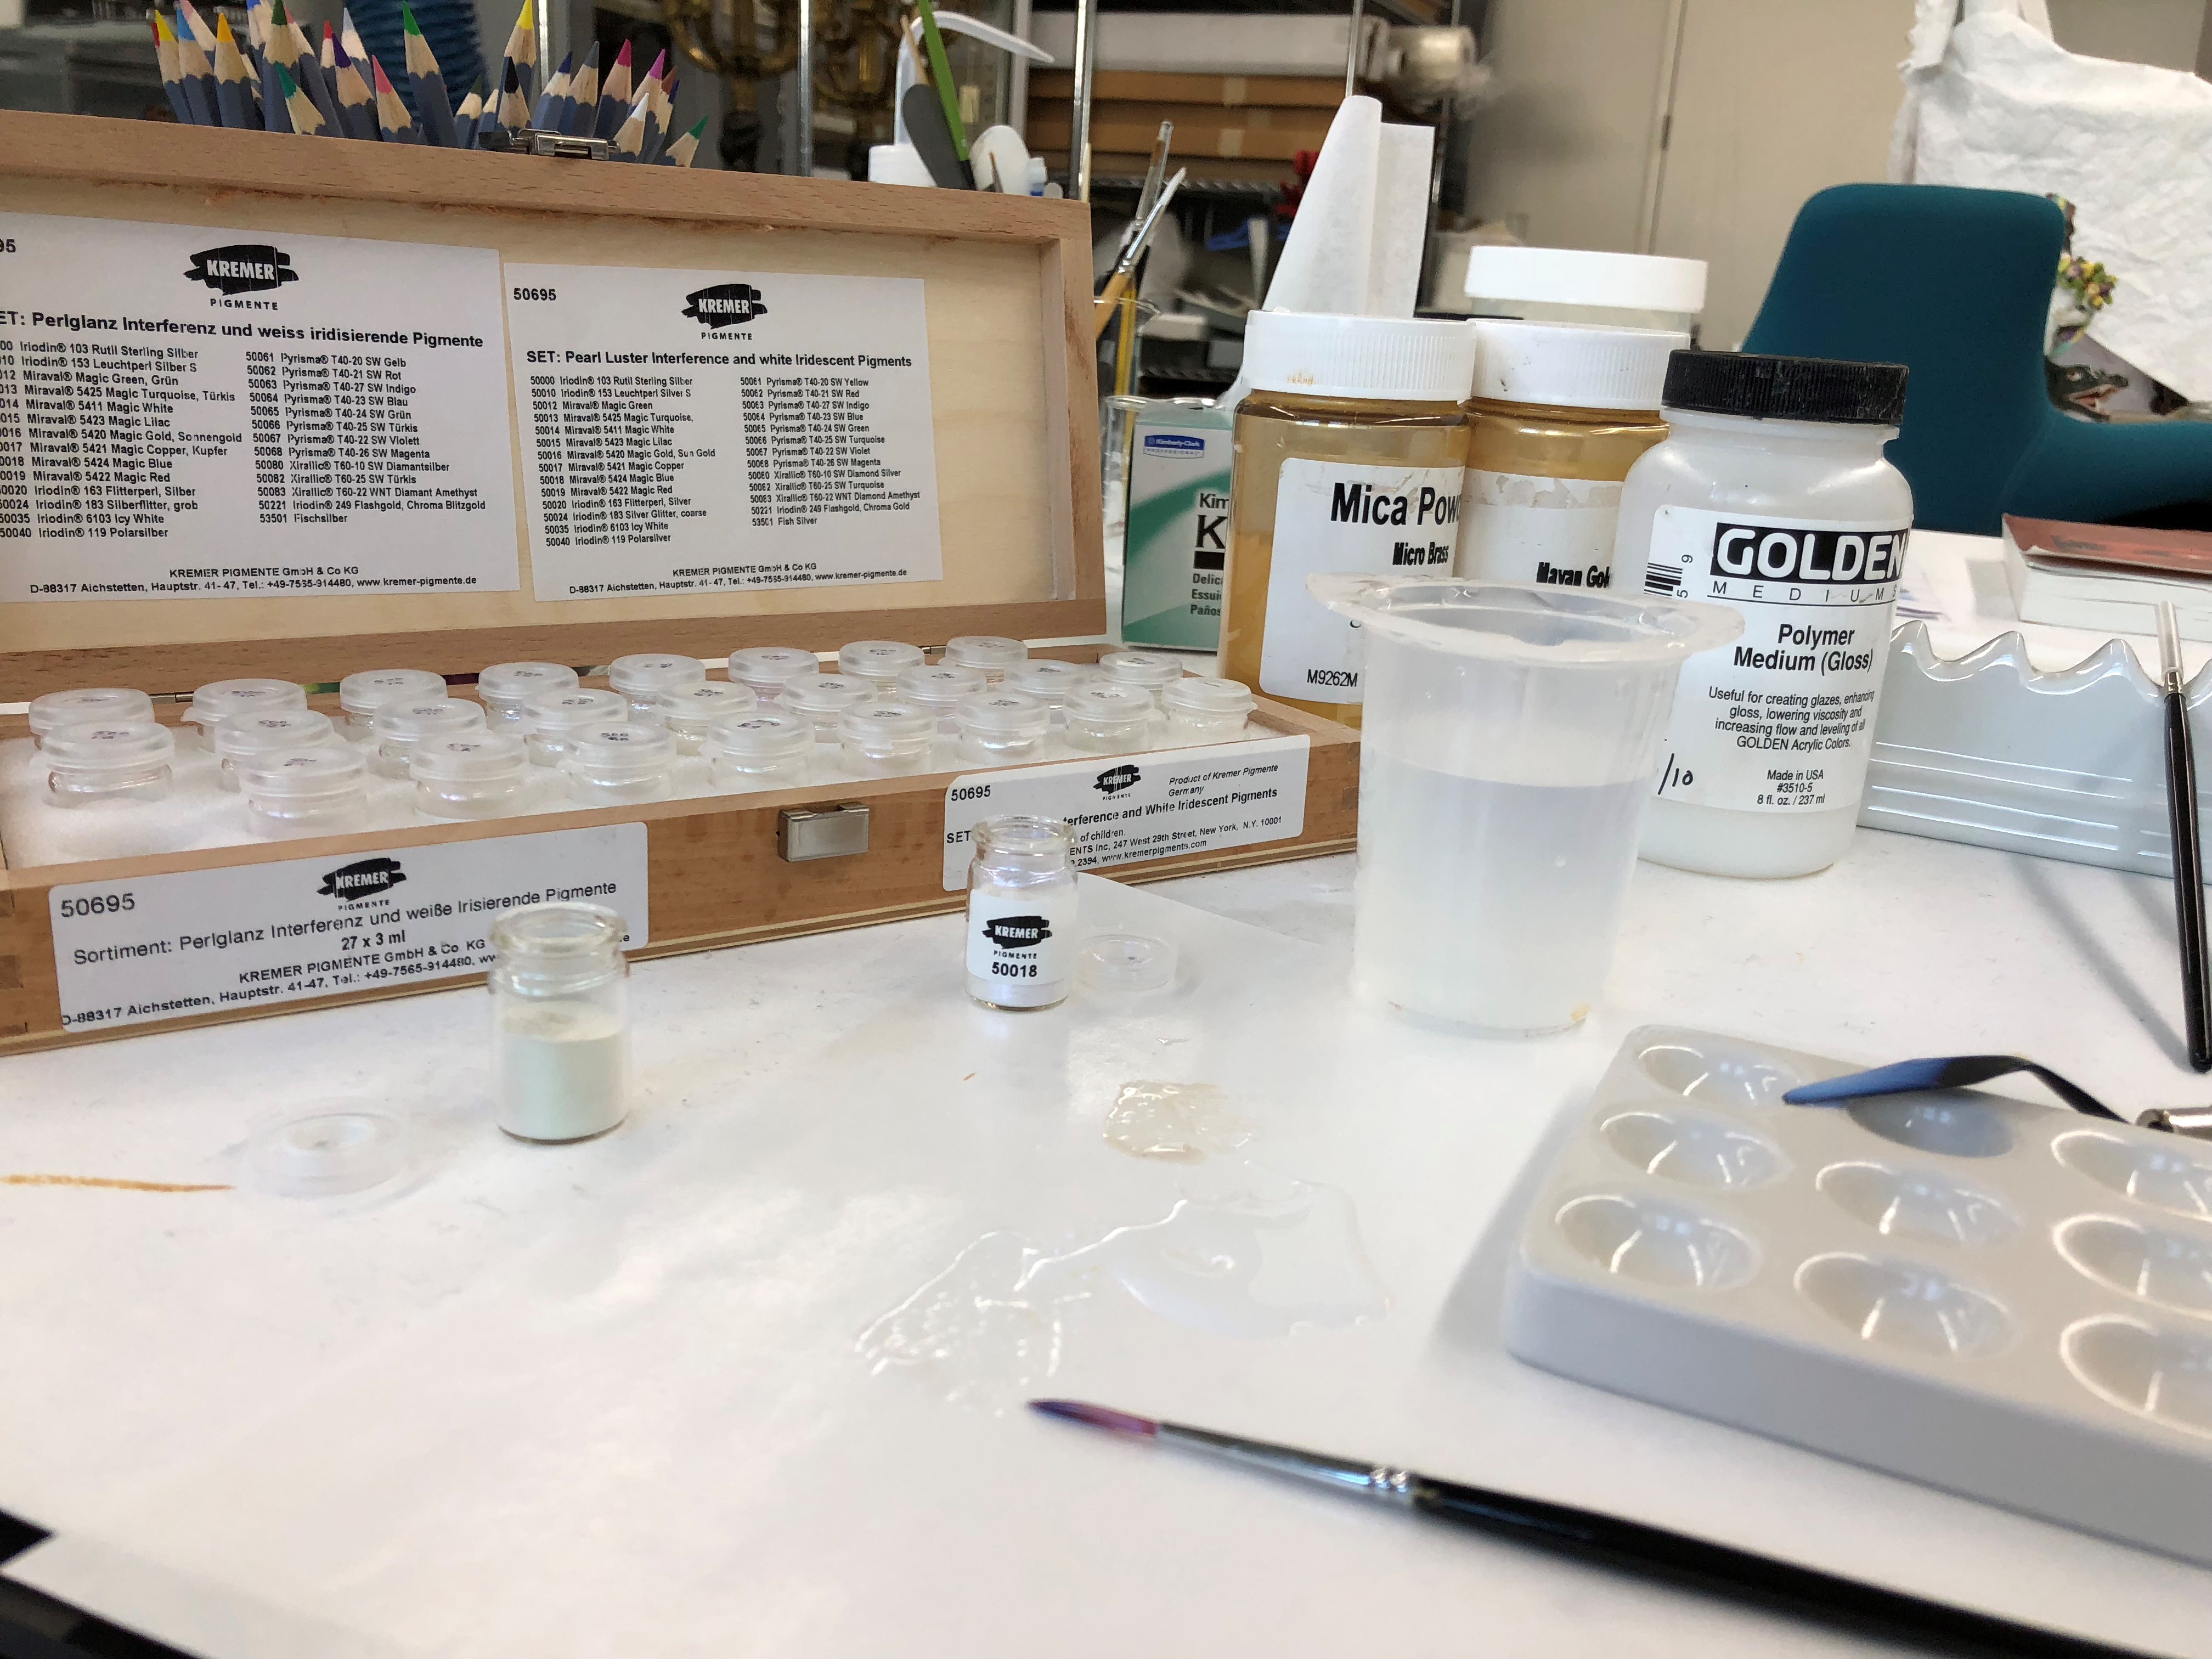 Photograph of a tabletop in a lab. It pictures a box of small viles containing pigrments. Various cups, jars, and brushes are placed around the workspace.